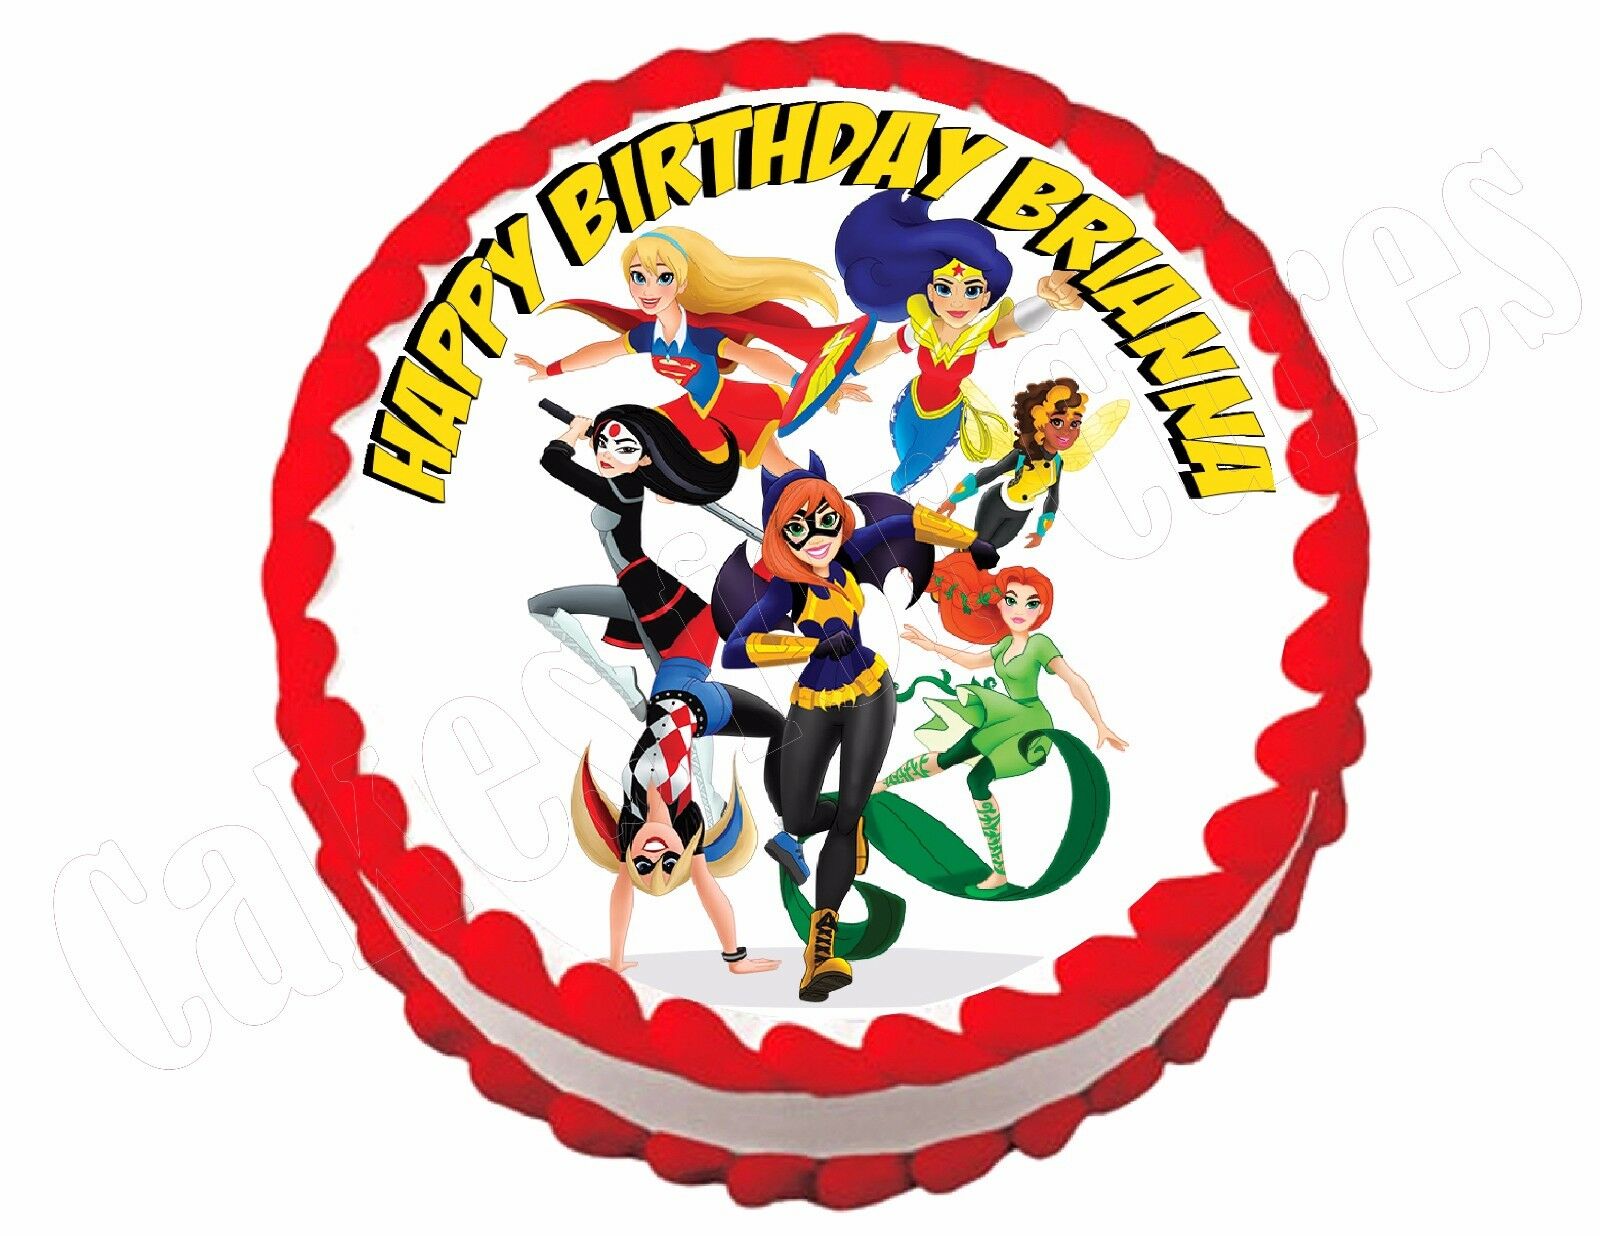 DC Super Hero Girls Cake Topper Edible Image Personalized Cupcakes Fro |  NineLife - United Kingdom